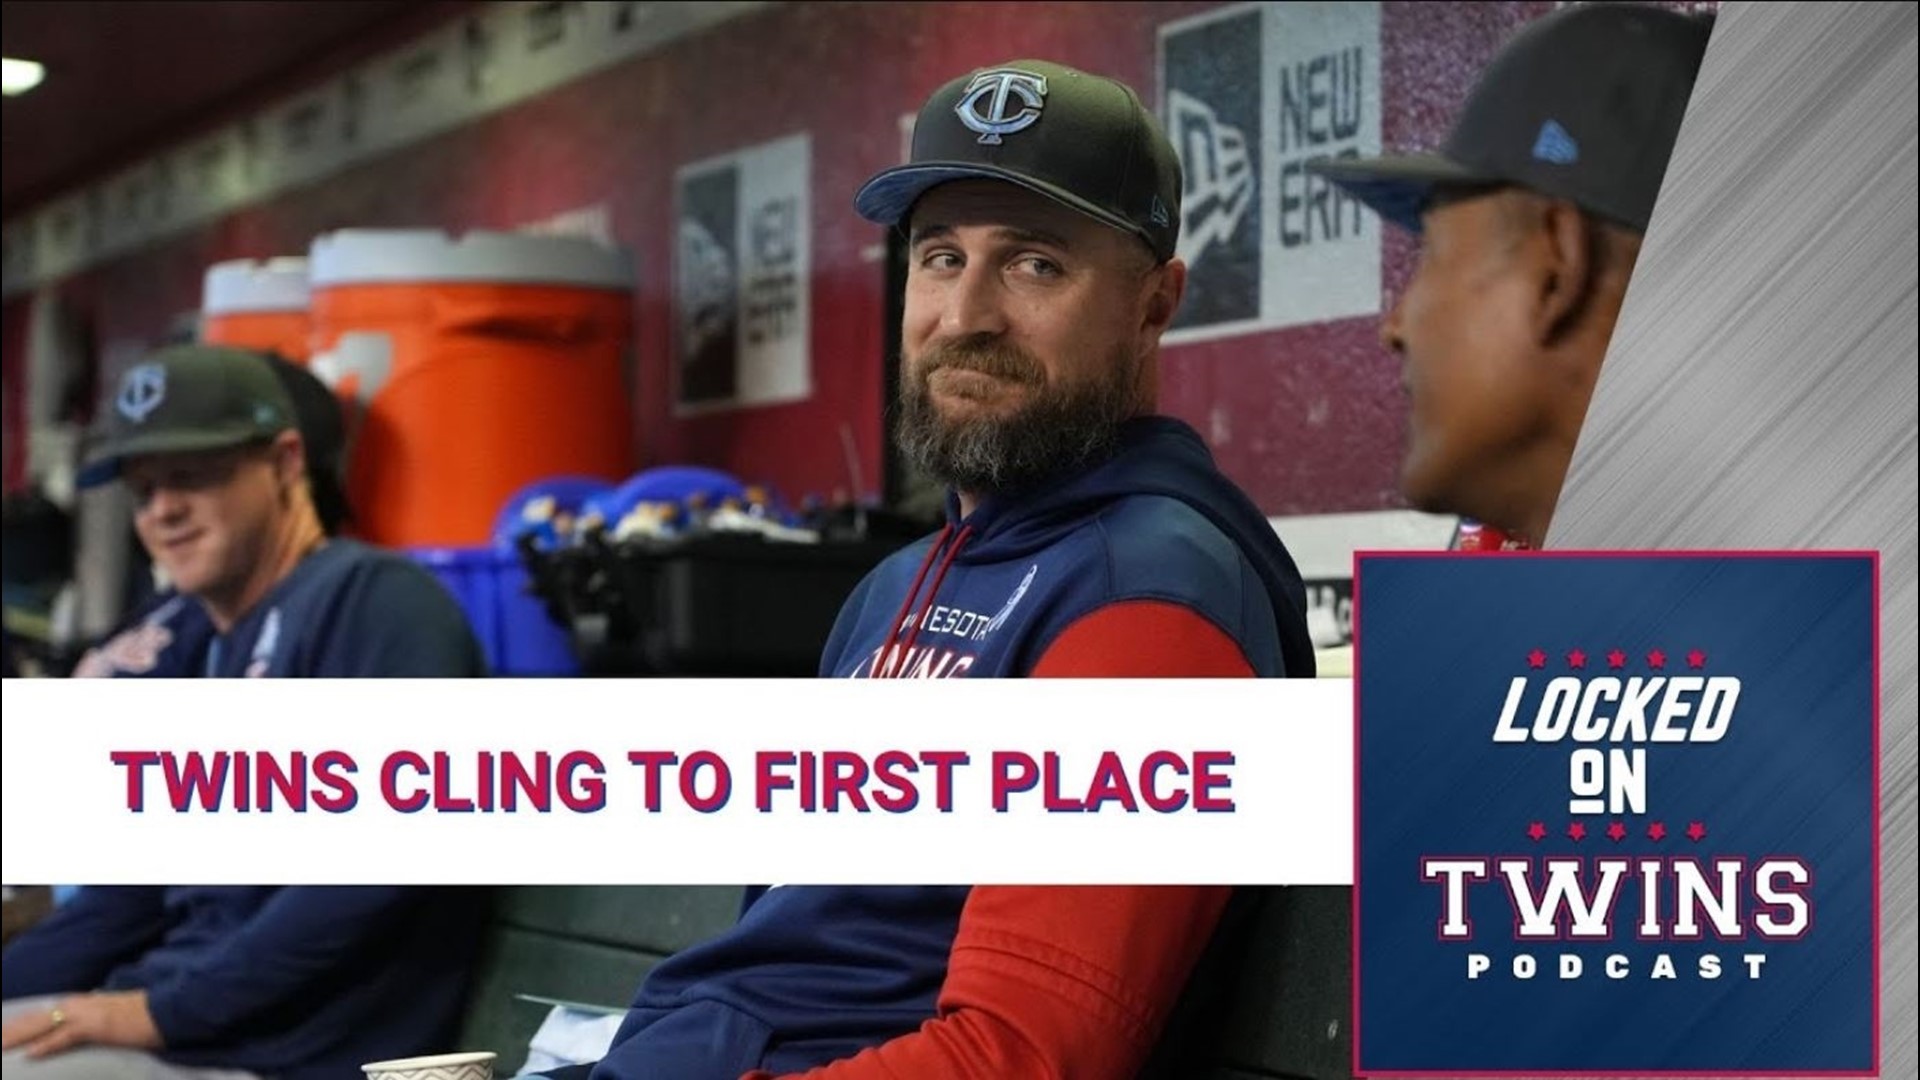 The Minnesota Twins went 3-3 on their west coast road trip, winning the series over the Mariners and dropping two out of three to the Diamondbacks.